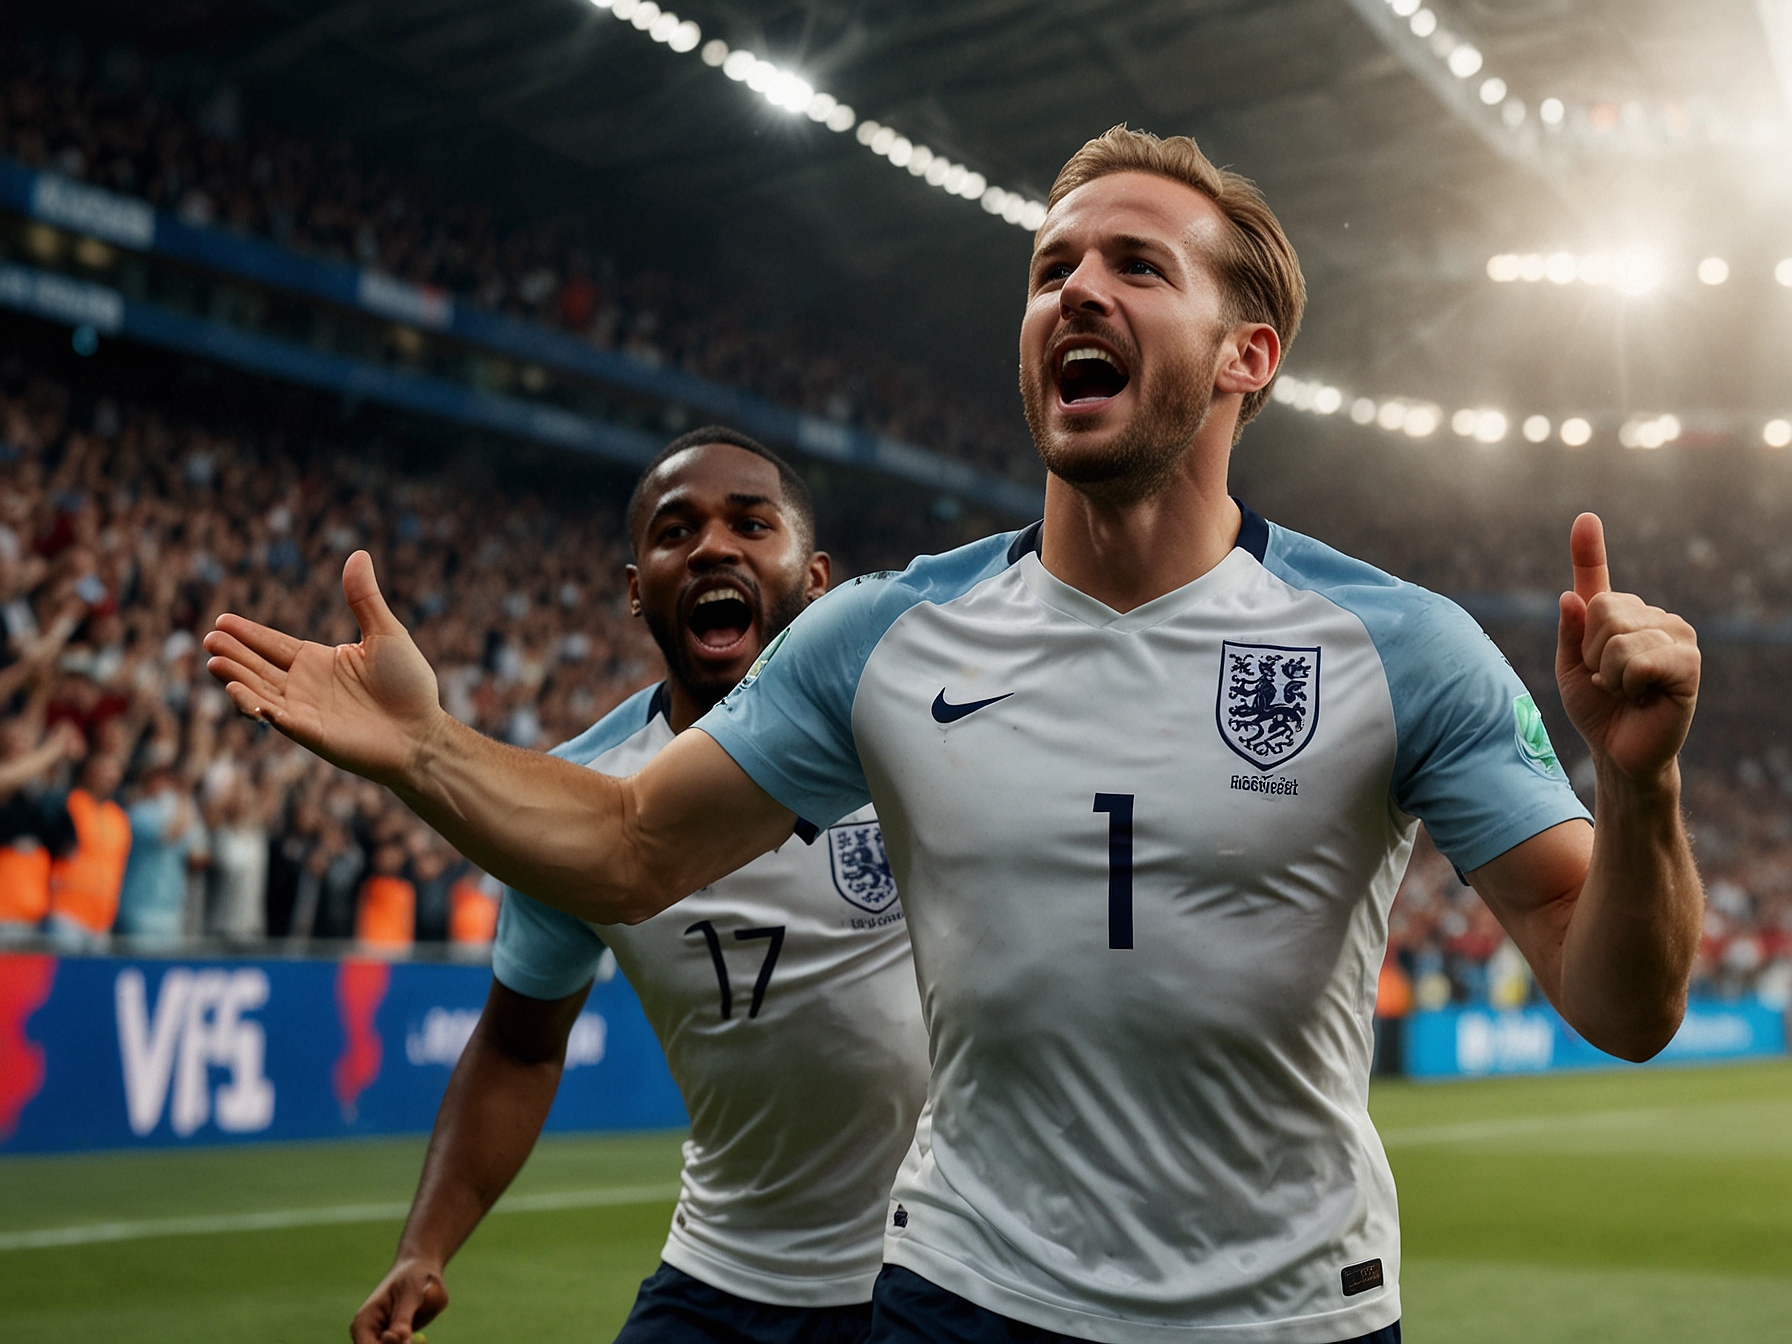 England's star players, Harry Kane and Raheem Sterling, celebrate a goal in front of cheering fans during Euro 2024, symbolizing their determination to secure a quarter-final spot.